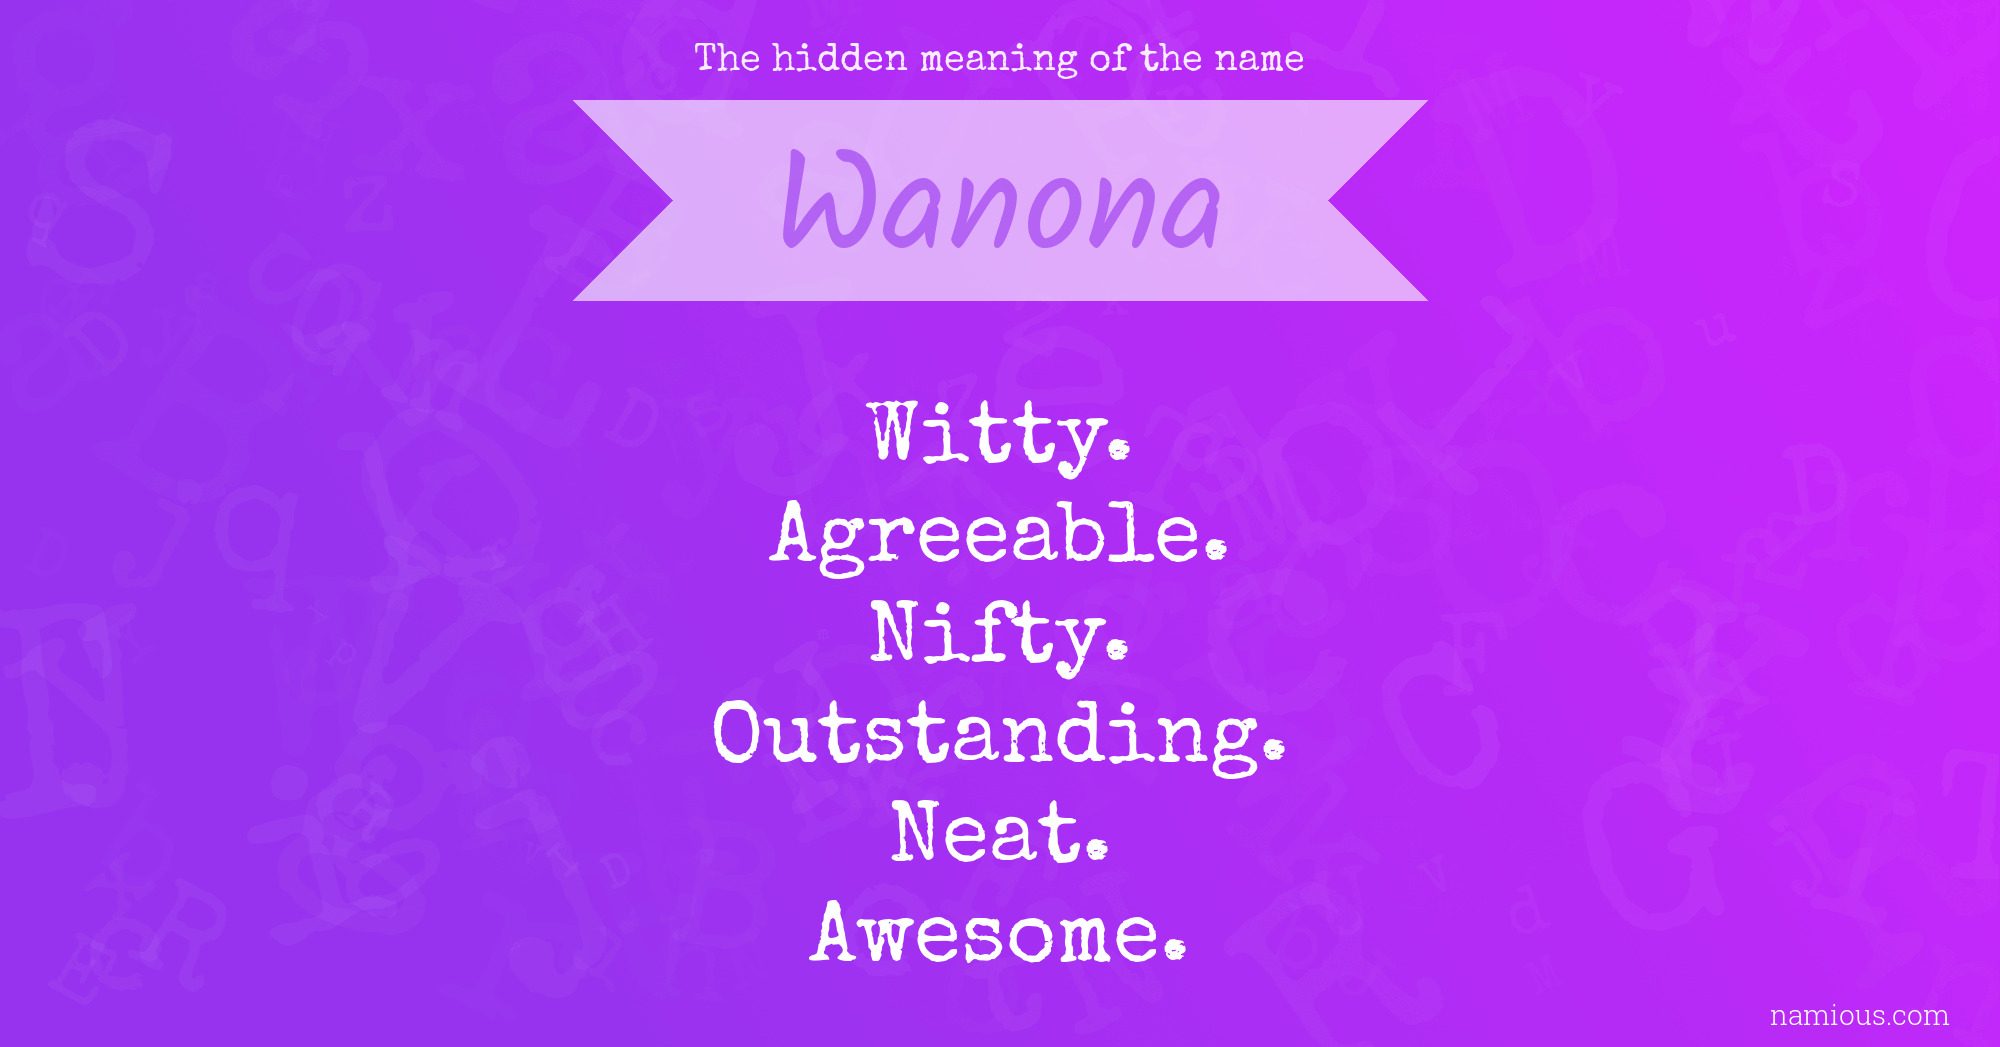 The hidden meaning of the name Wanona